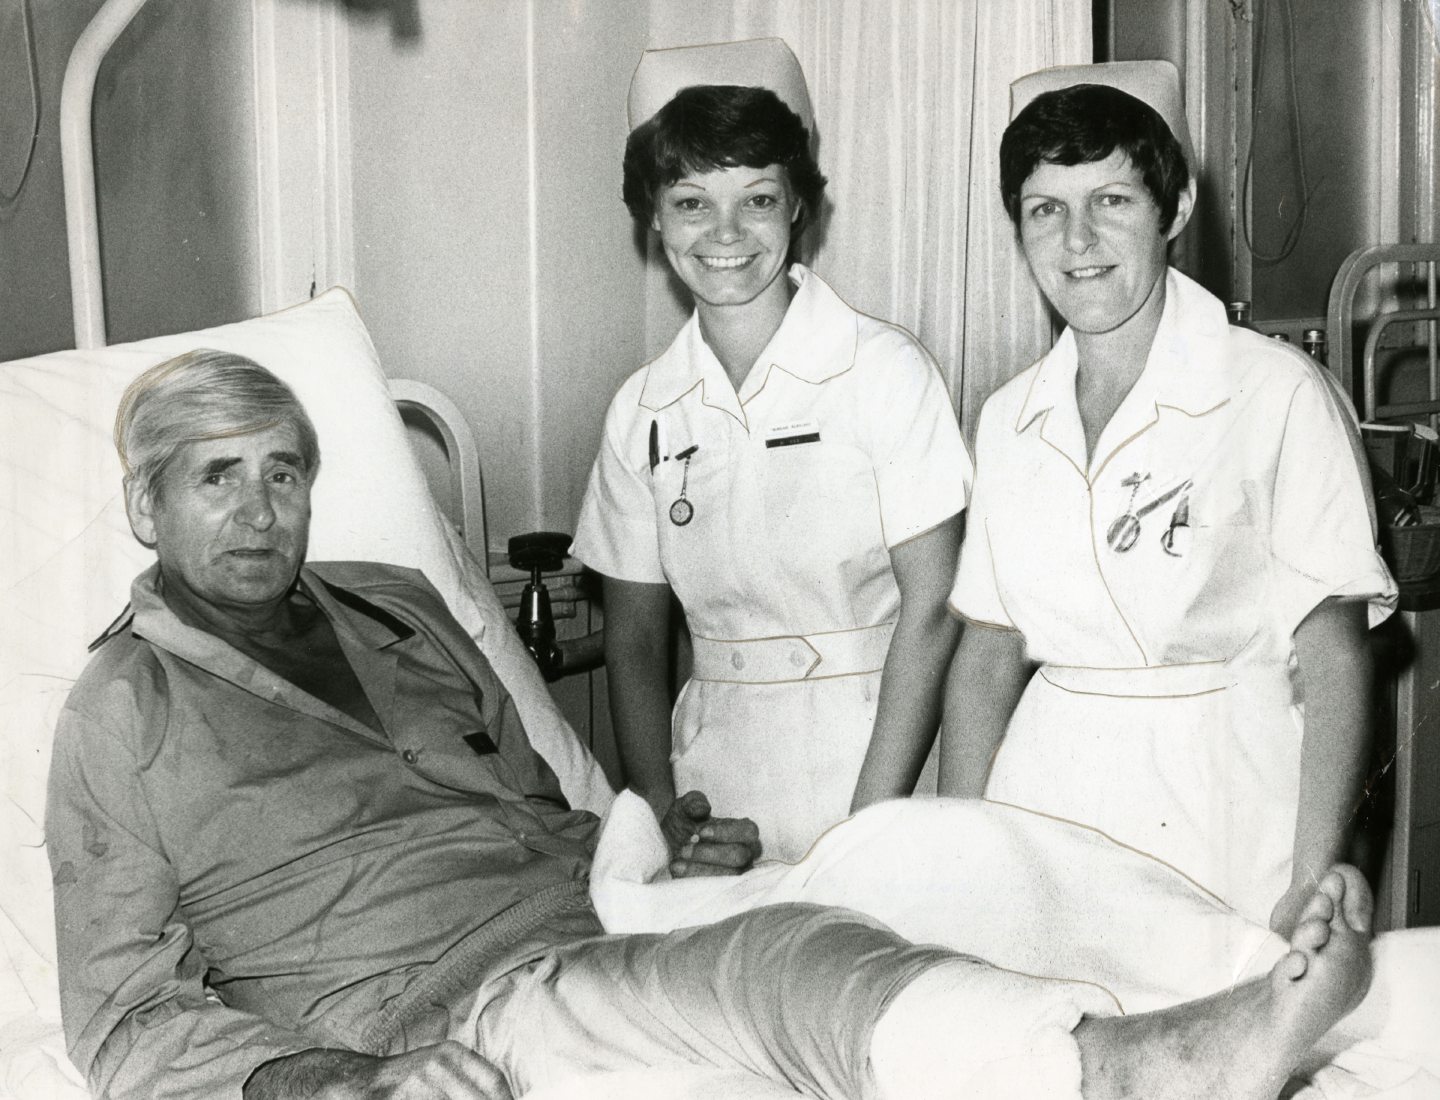 Albert Juliussen broke his leg while helping his daughter to move house in 1978 and ended up in Dundee Royal Infirmary.